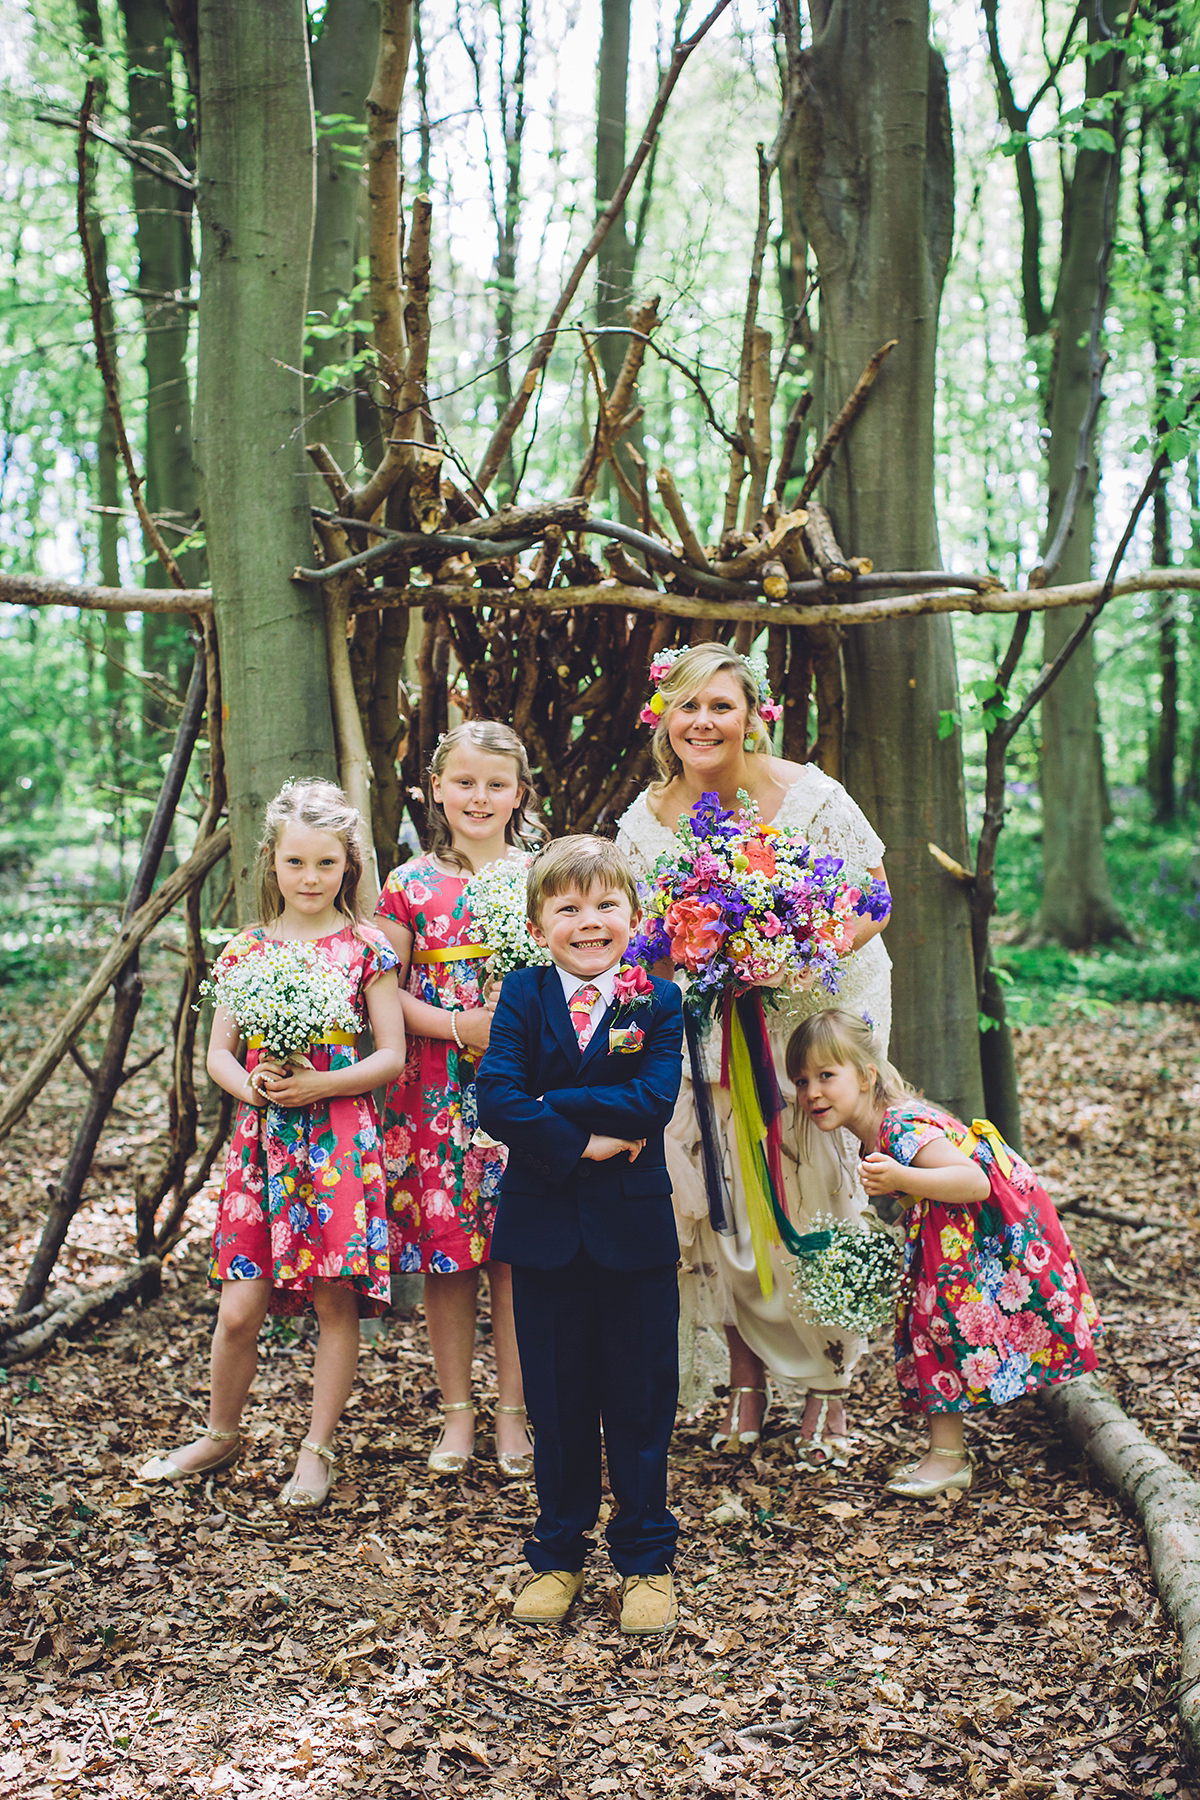 A bridal boutique owner's colourful, whimsical, bluebell filled woodland wedding. Photography by Olegs Samsonovs.